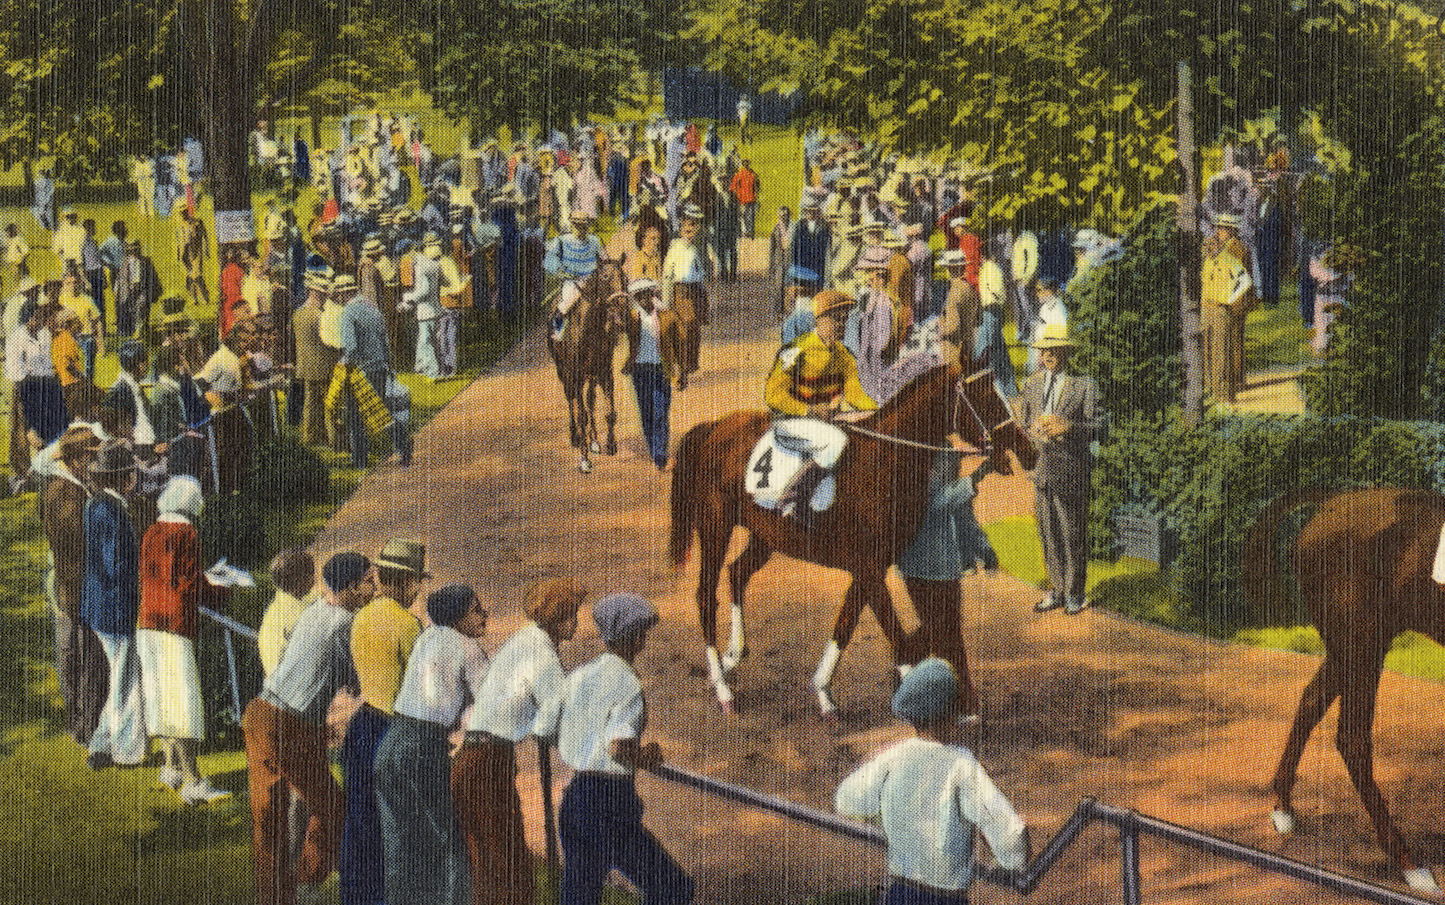 A parade from paddock to post along the back yard’s meandering pathways. Image courtesy of Boston Public Library